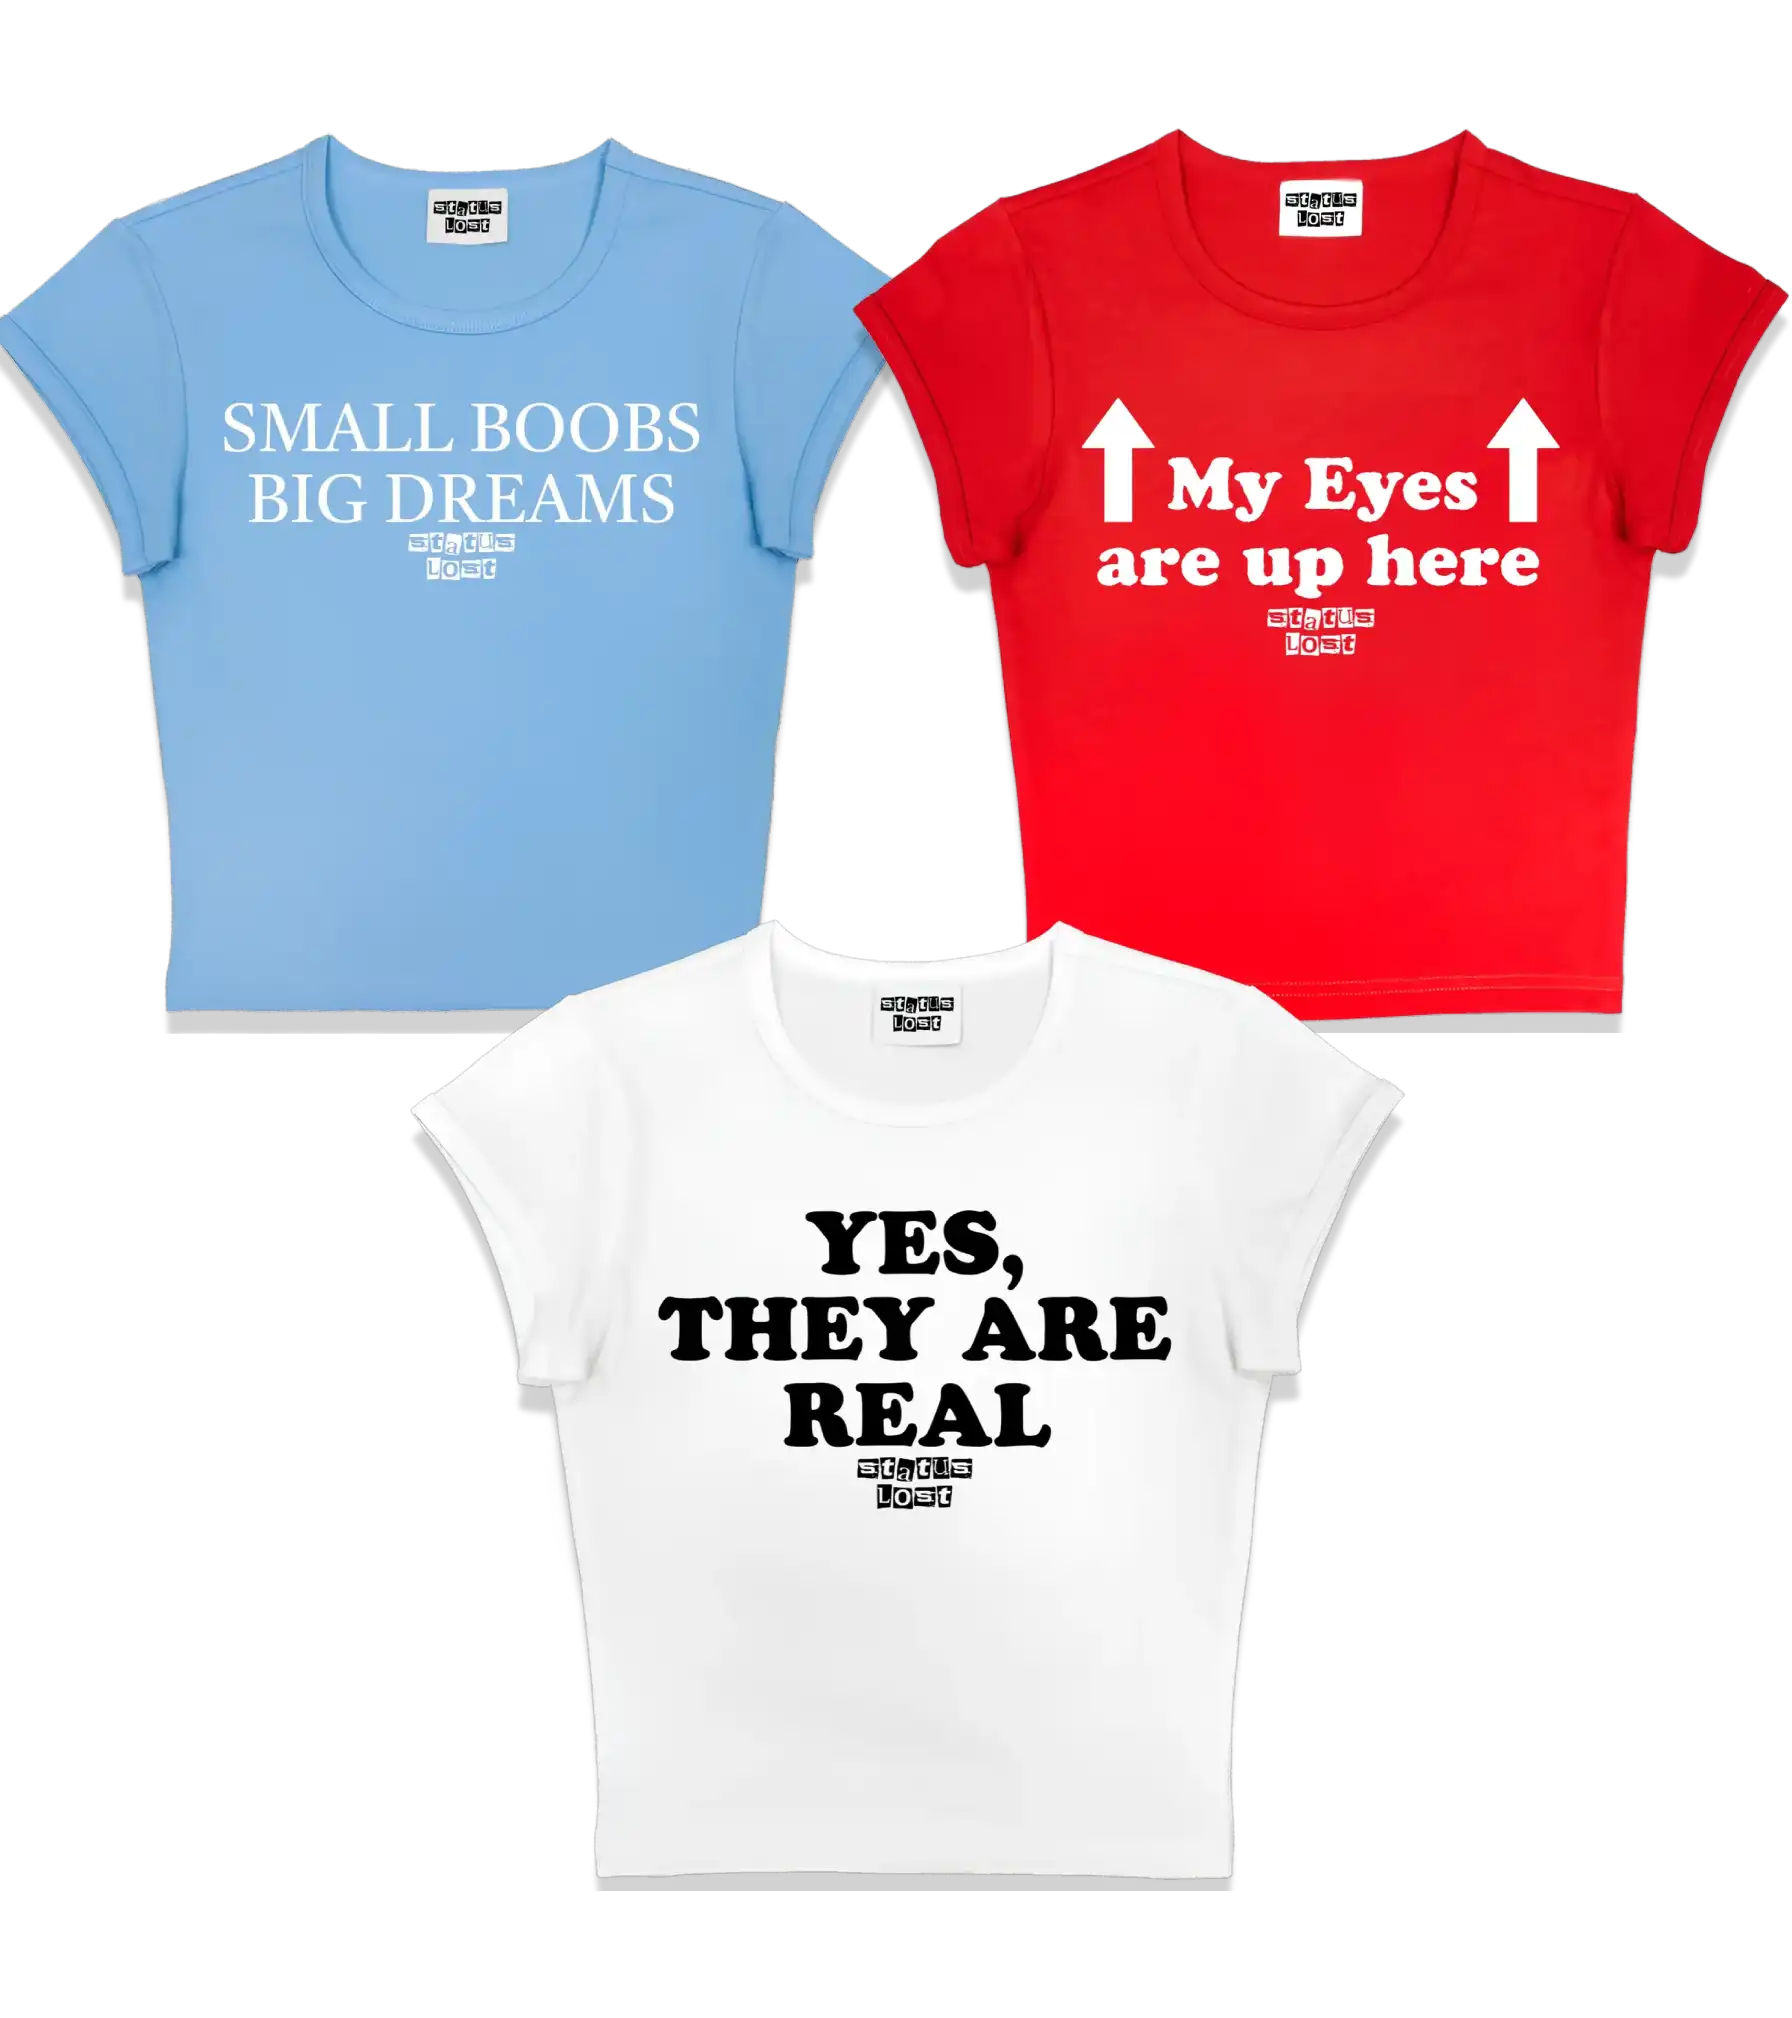 "SMALL BOOBS BIG DREAMS" & "YES THEY ARE REAL" & "MY EYES ARE UP HERE" Matching Trio